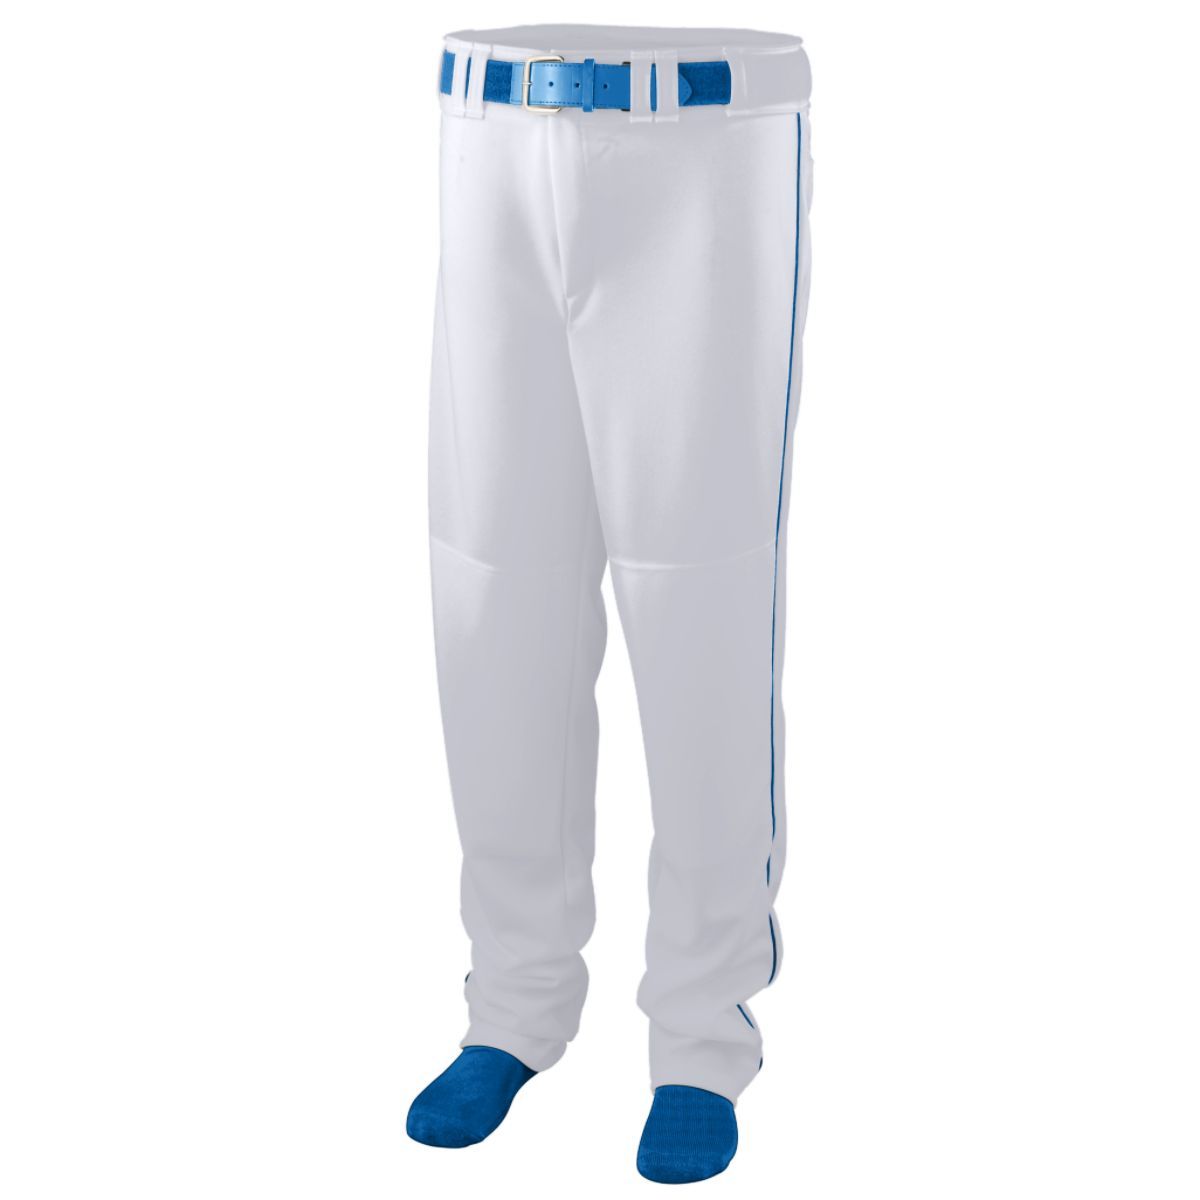 Augusta Sportswear Series Baseball/Softball Pant With Piping in White/Royal  -Part of the Adult, Adult-Pants, Pants, Augusta-Products, Baseball, All-Sports, All-Sports-1 product lines at KanaleyCreations.com